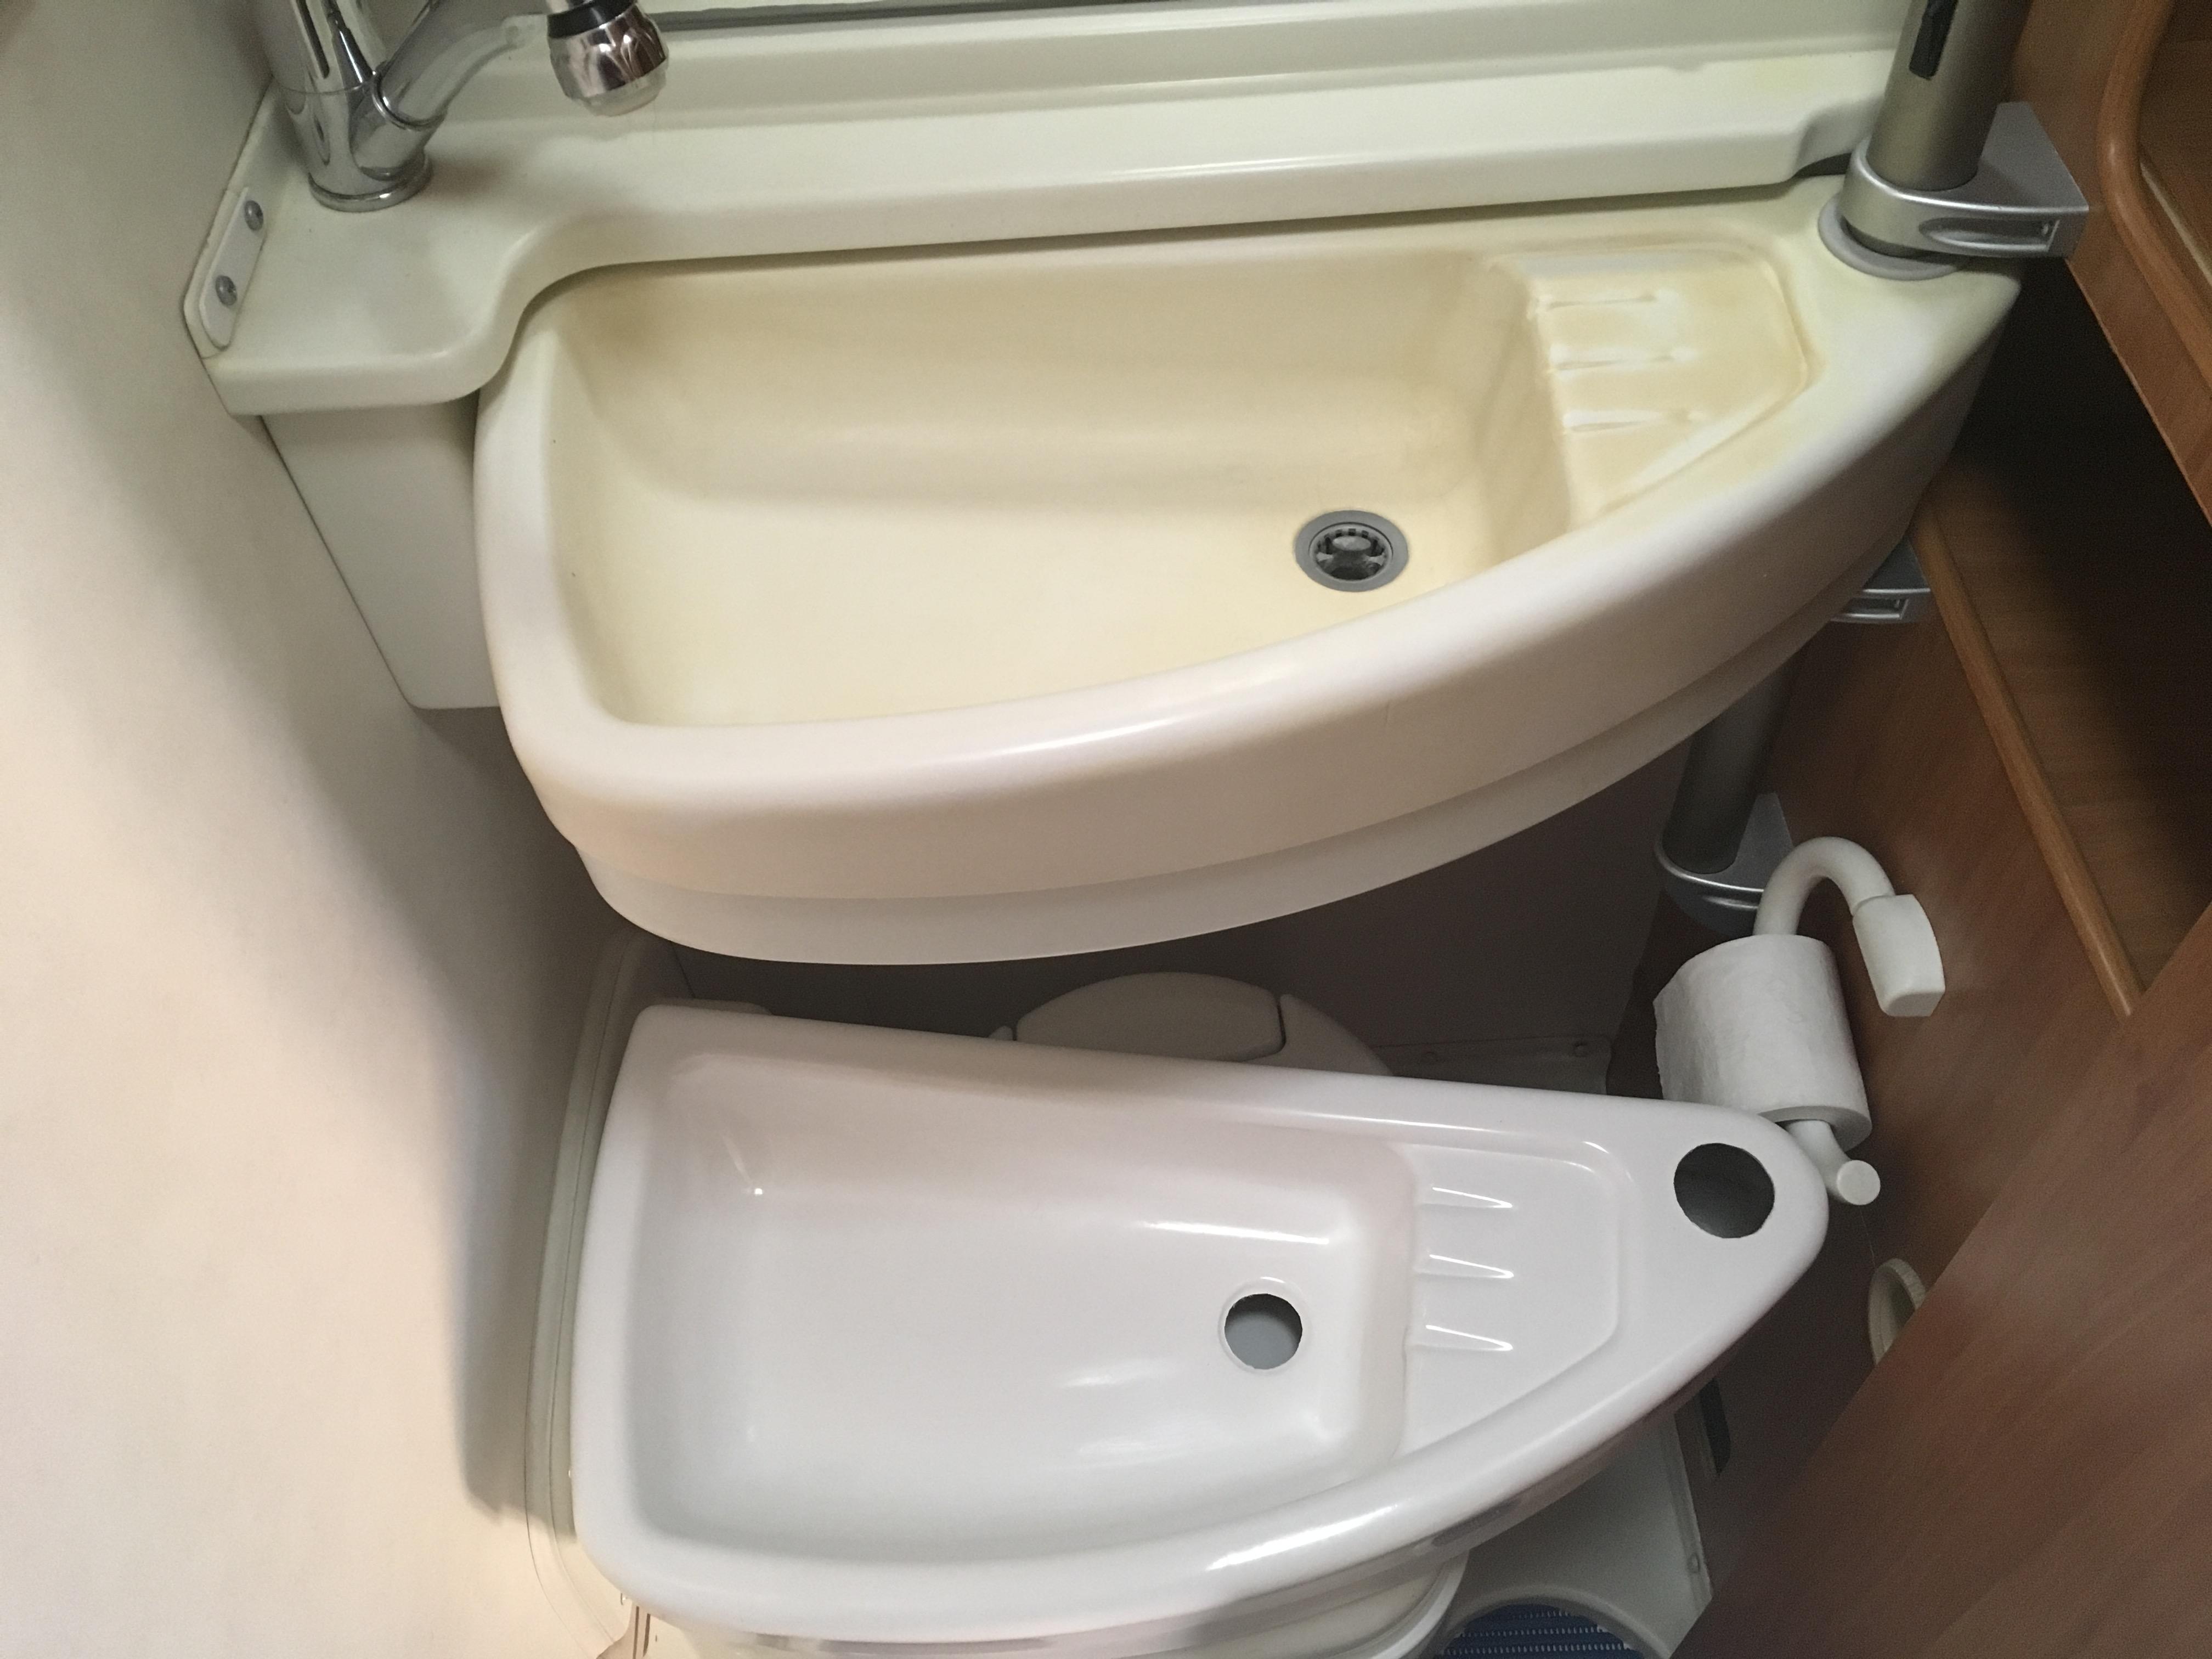 Comparing the old and new sinks